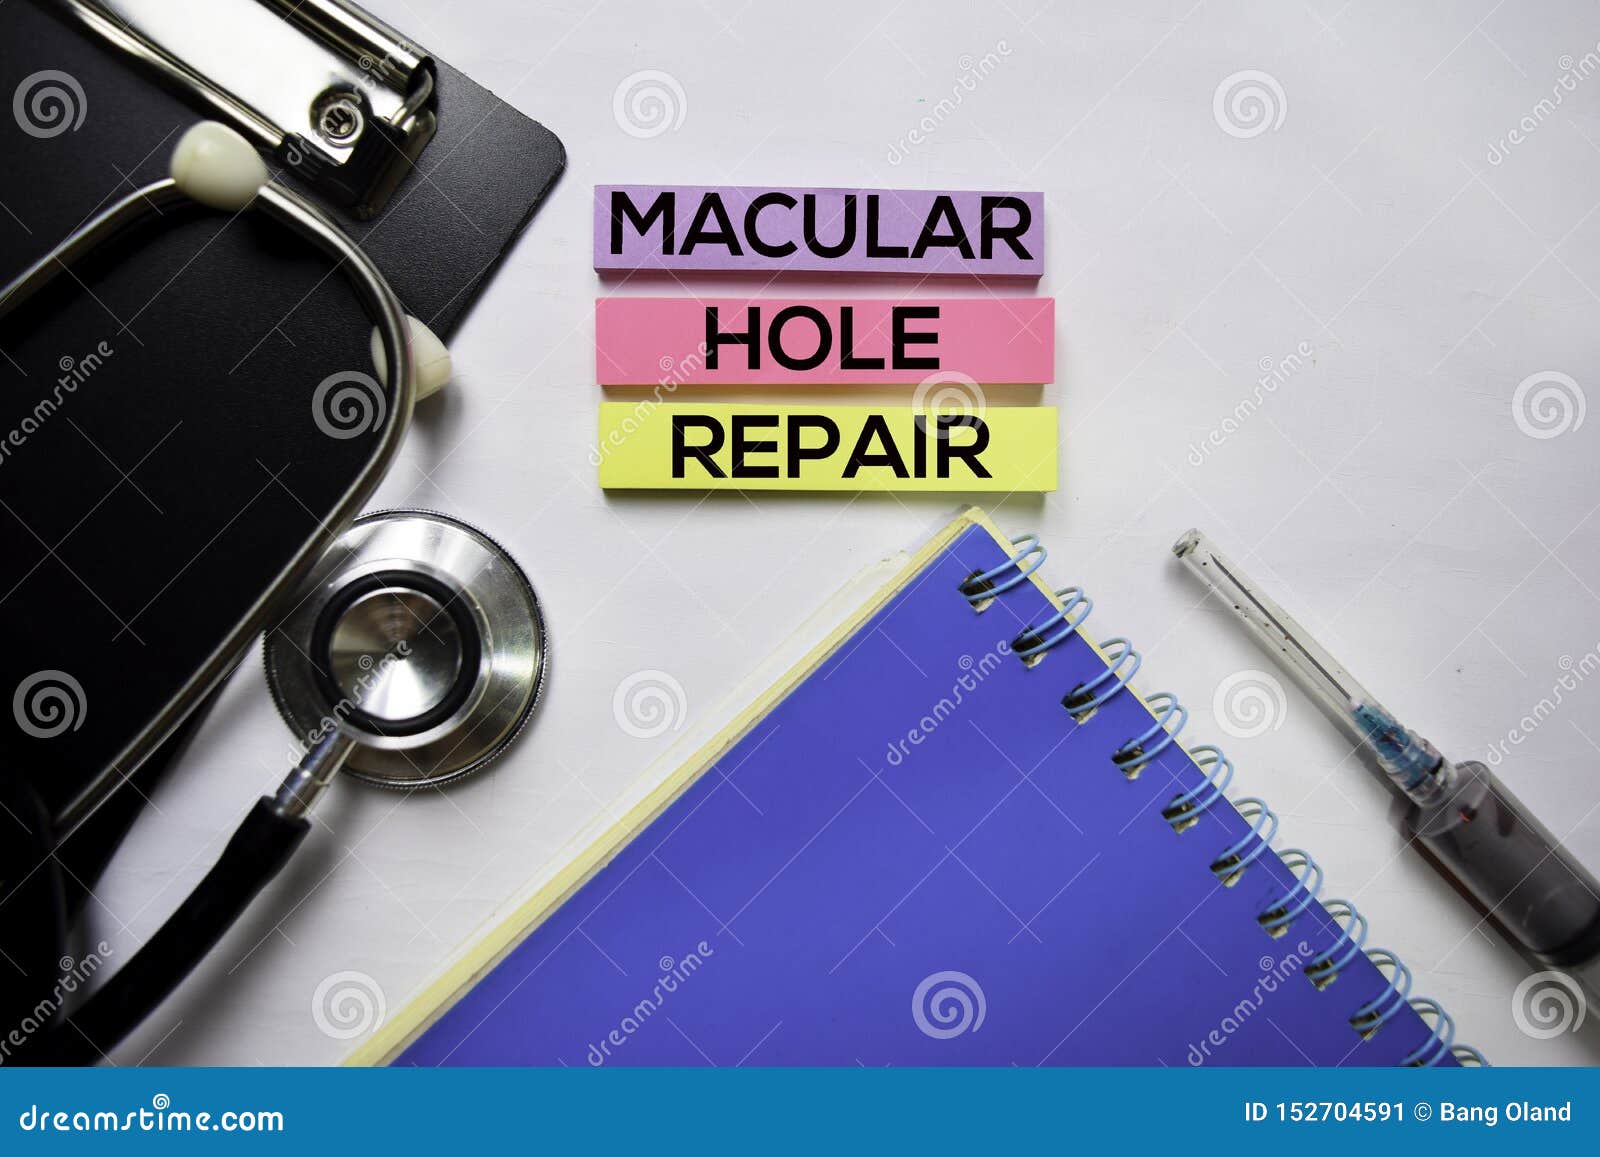 macular hole repair text on top view  on white background. healthcare/medical concept